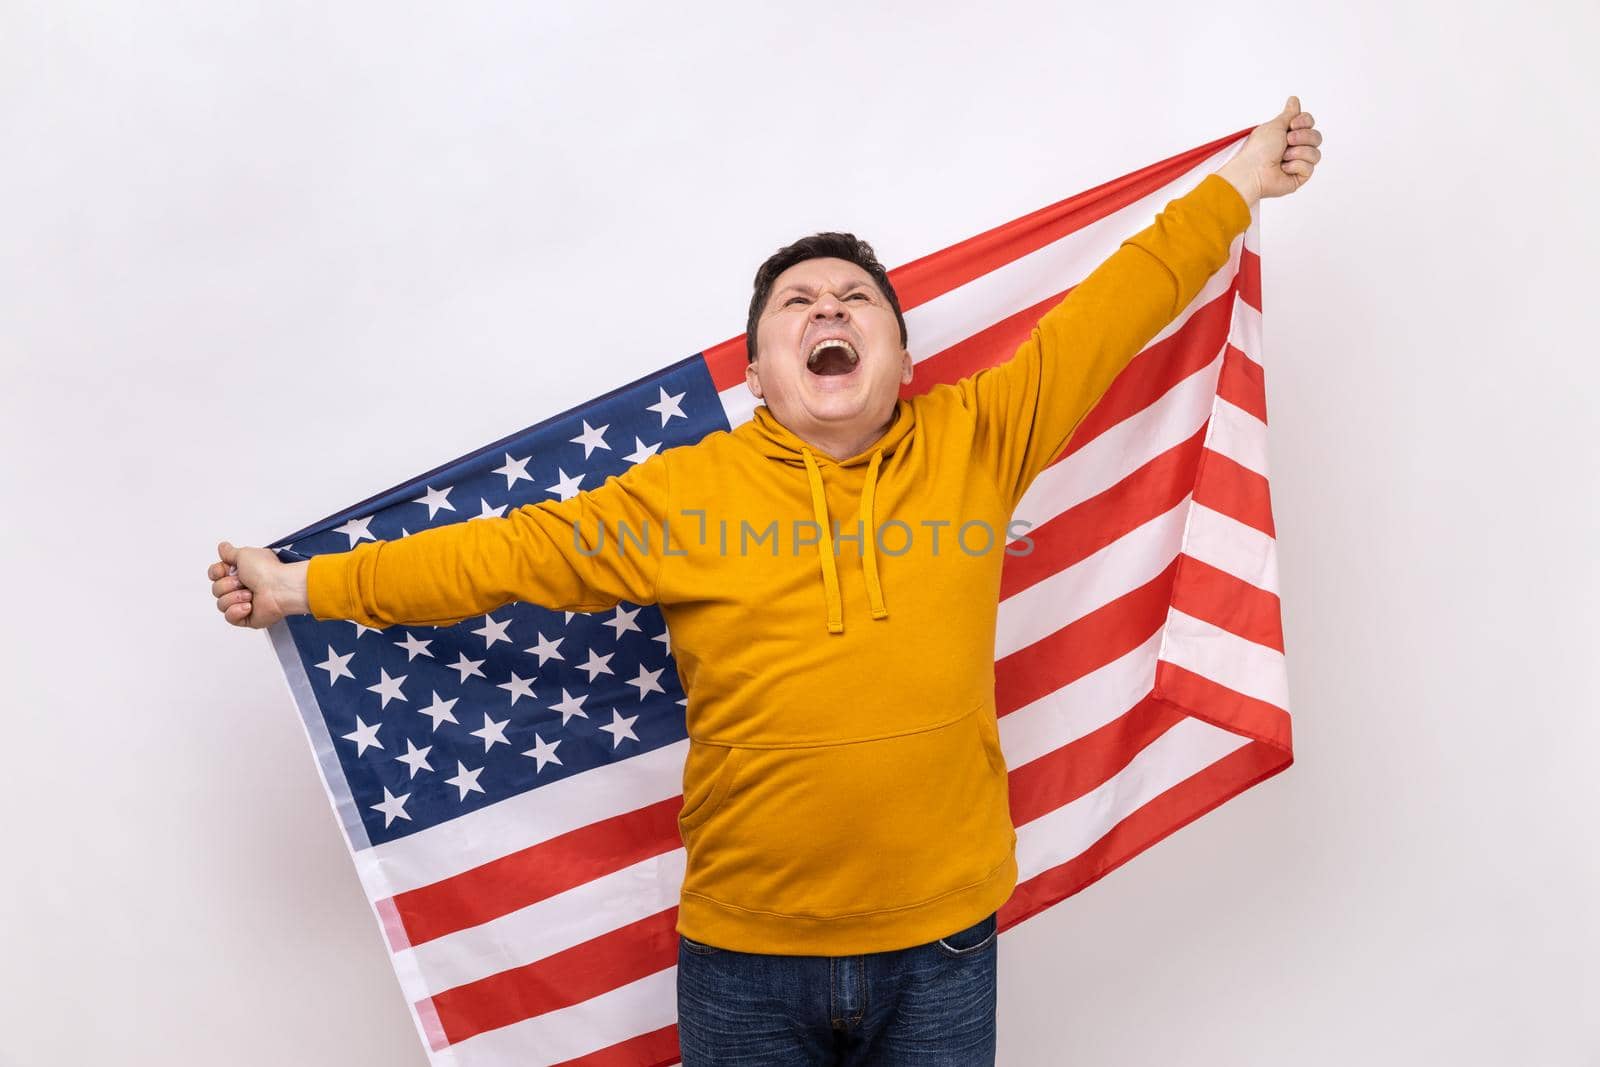 Man holding USA flag and screaming happily, looking up, celebrating national holiday. by Khosro1